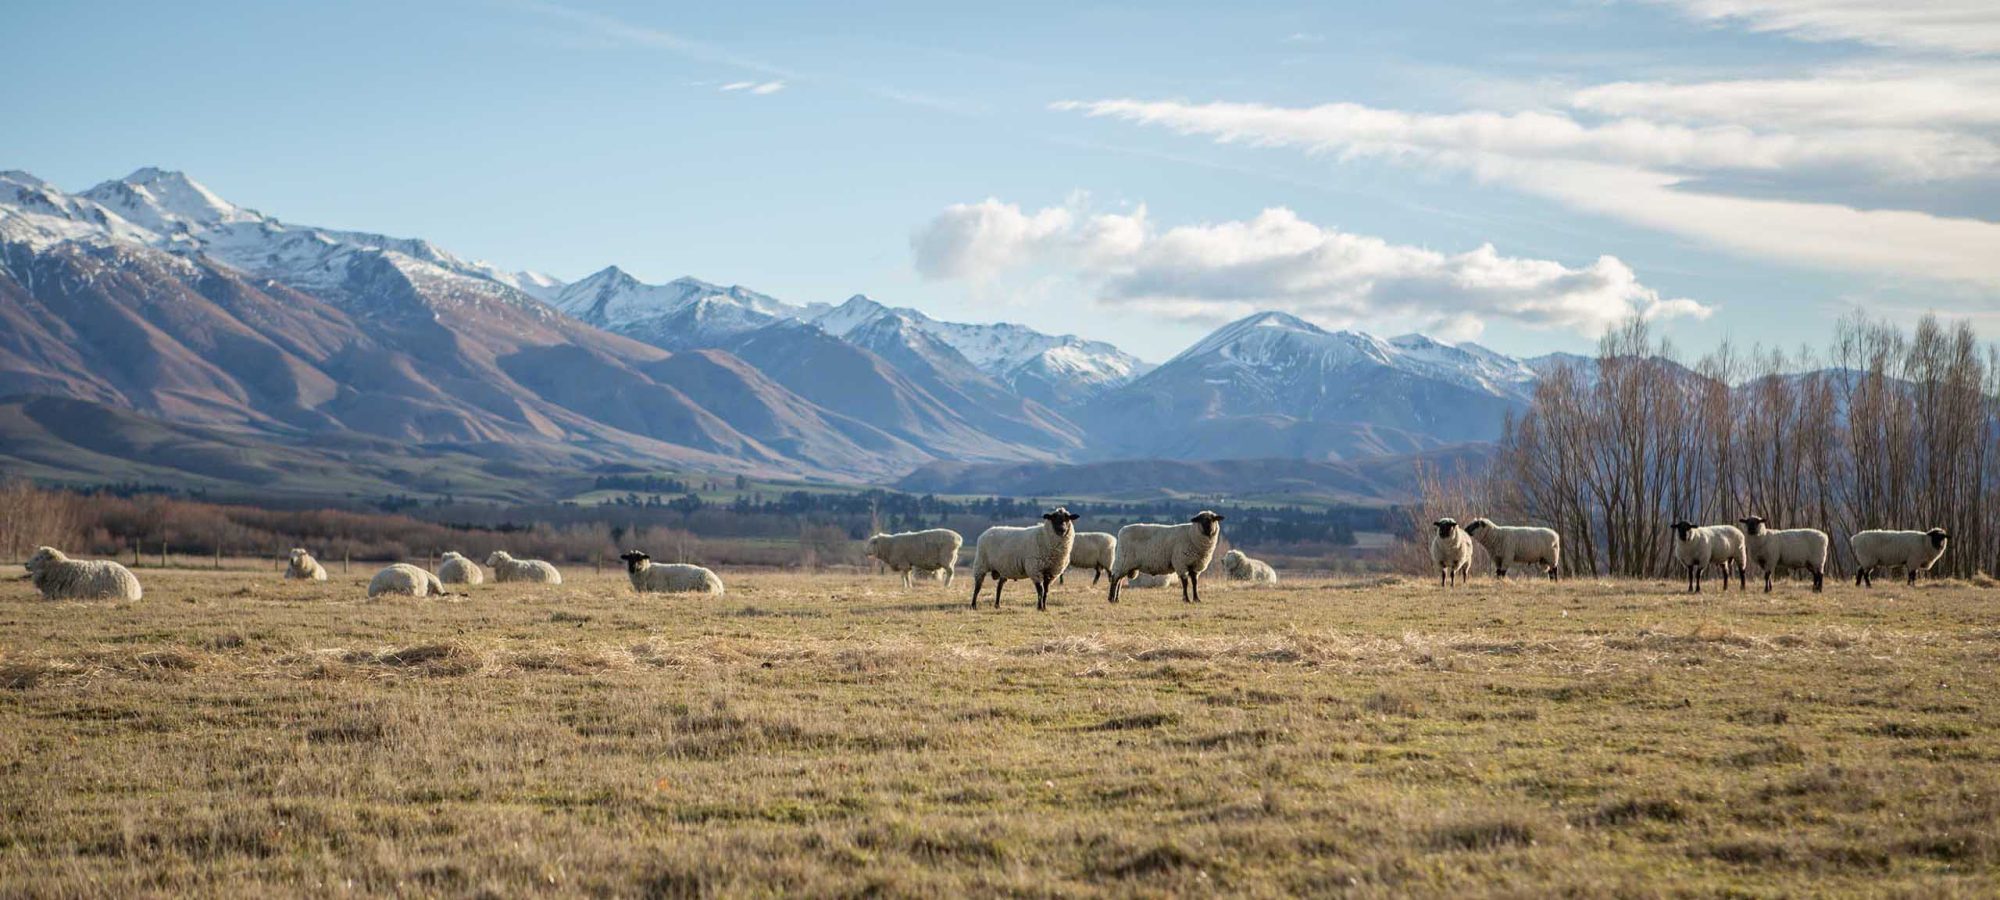 Herd of sheep in meadow with snowcapped mountain in background